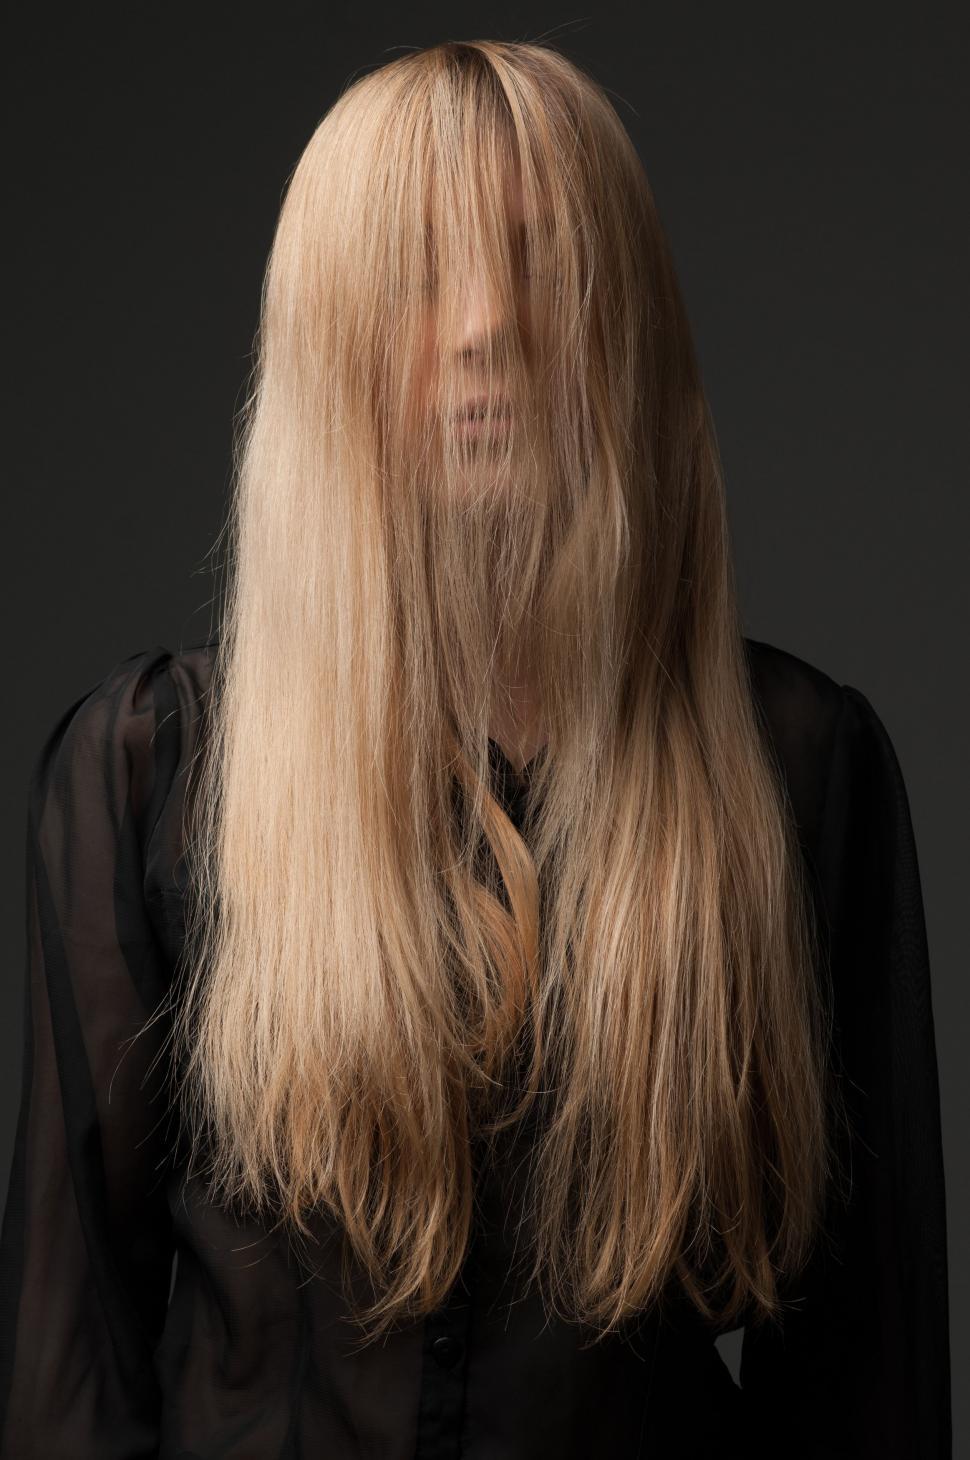 Free Image of Woman With Long Blonde Hair in Front of Black Background 